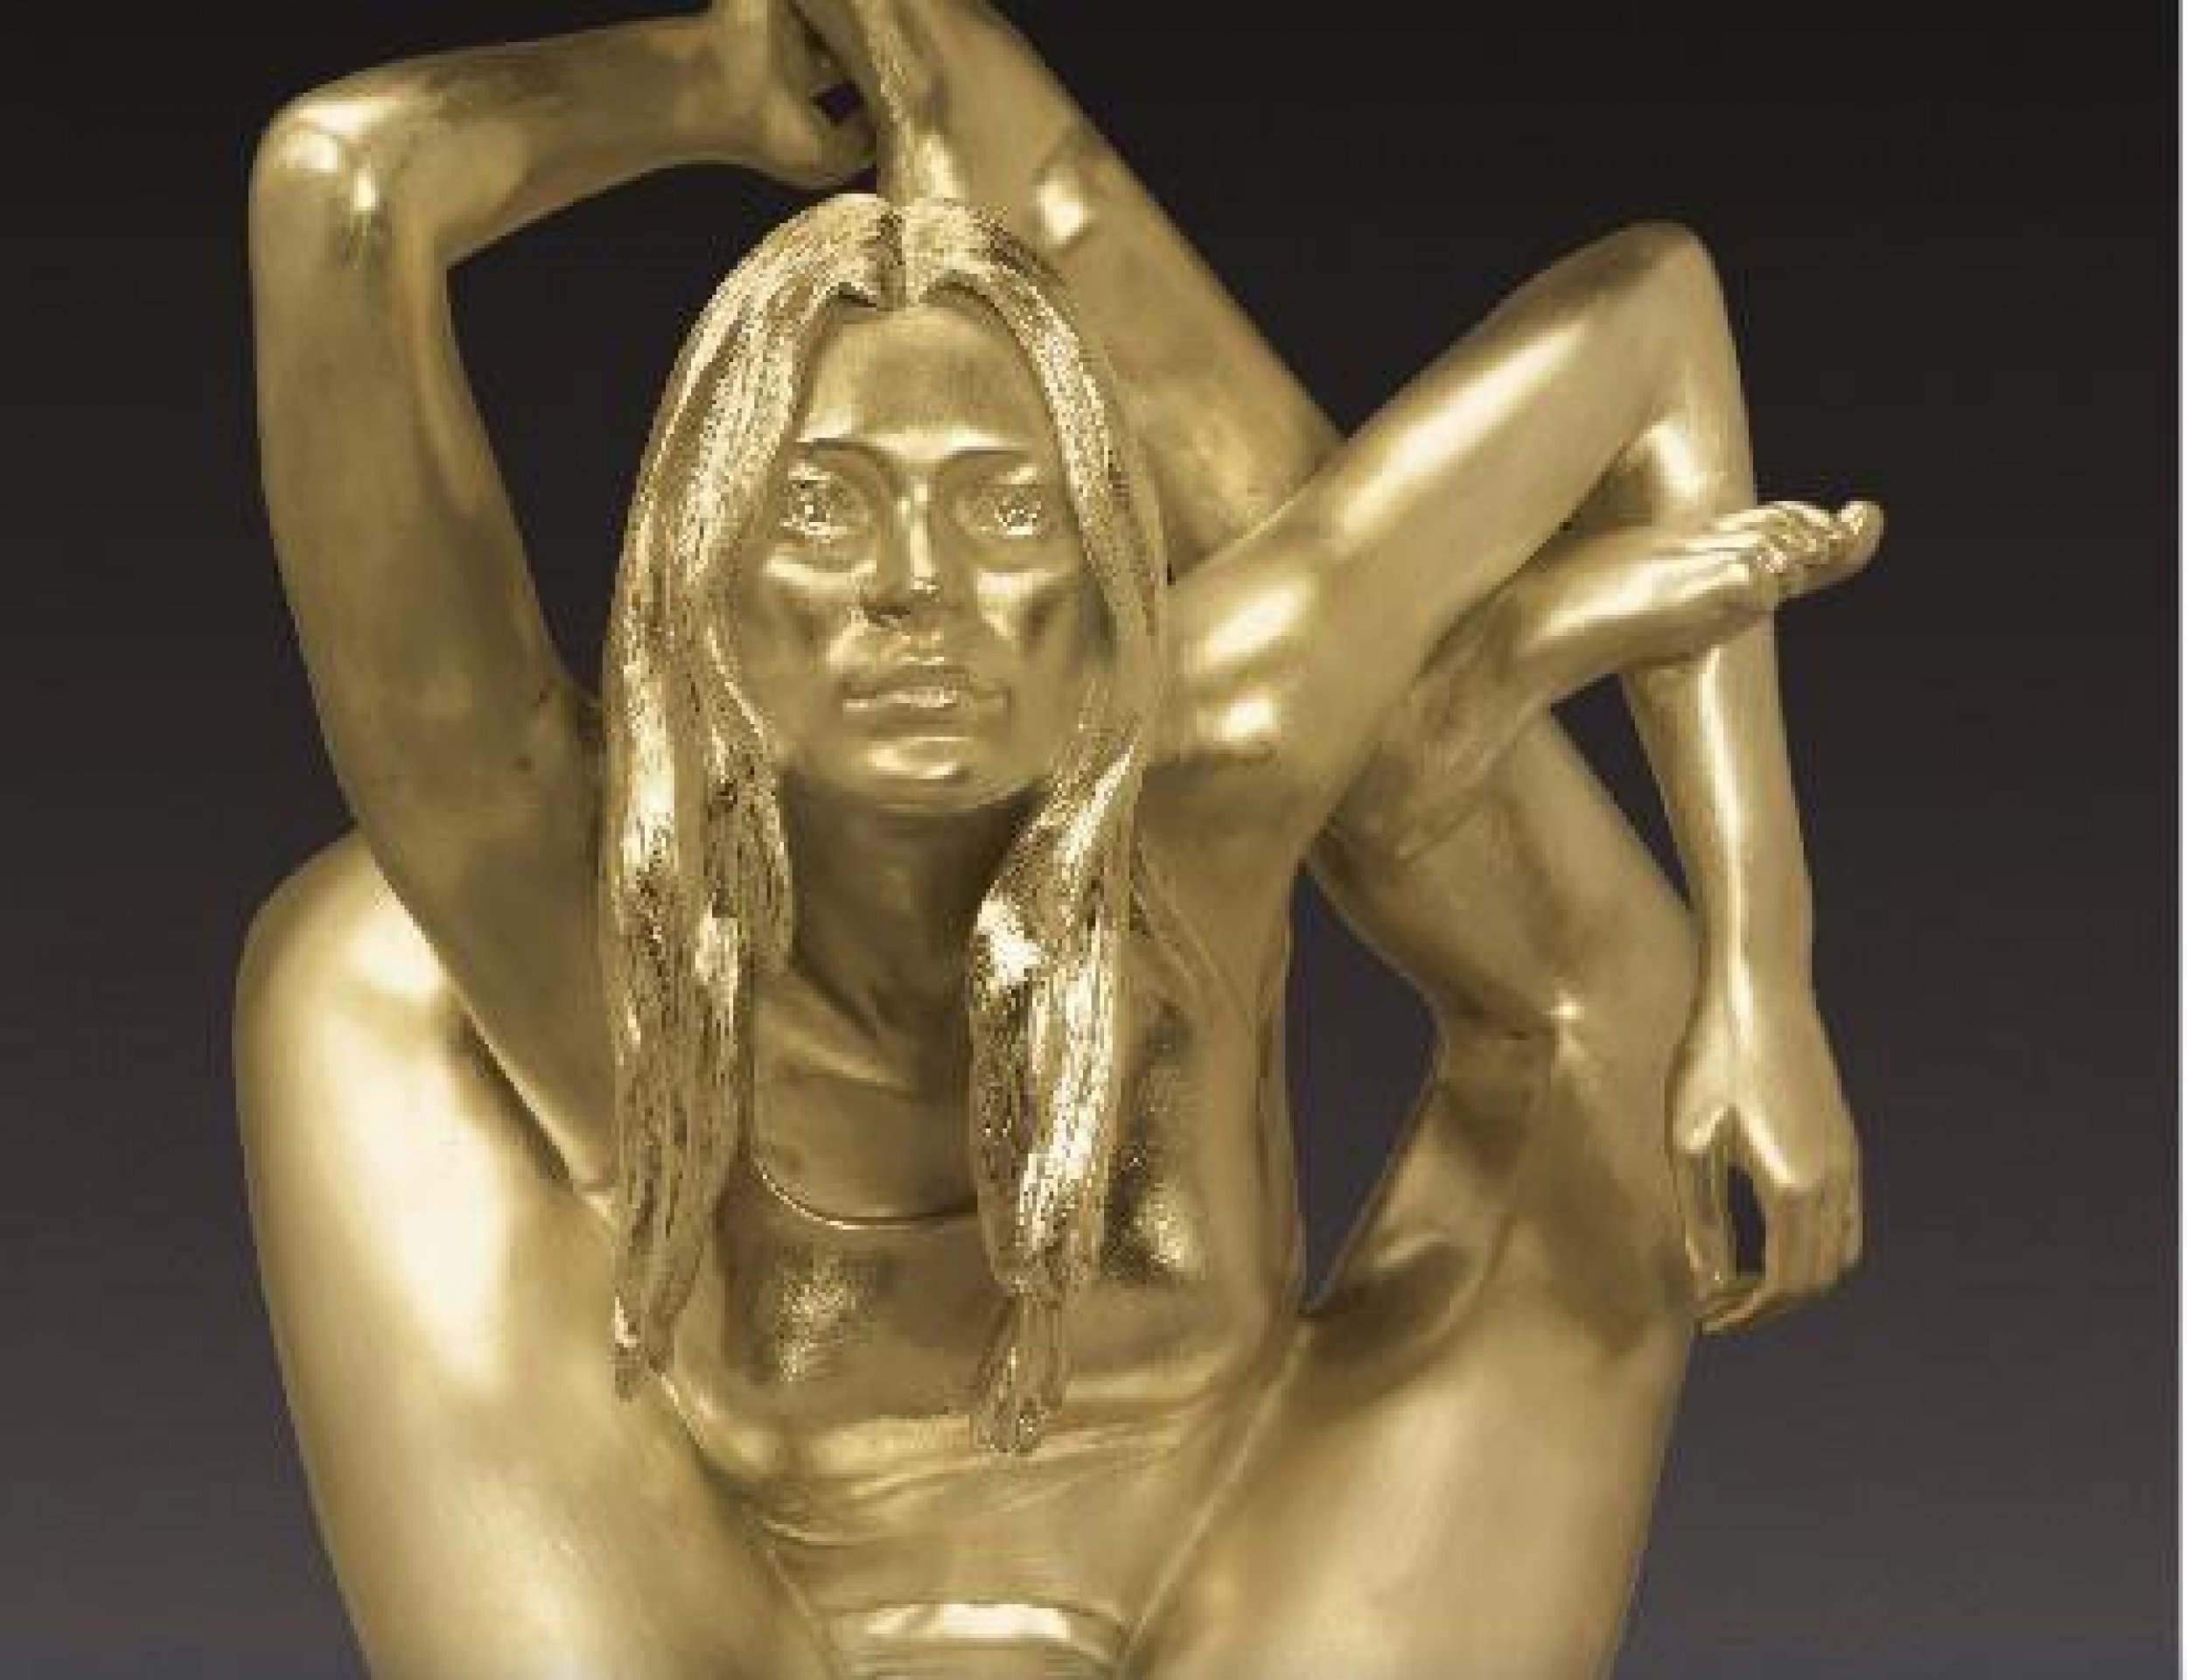 Contorted Kate Moss Gold Sculpture Auctioned at 900000